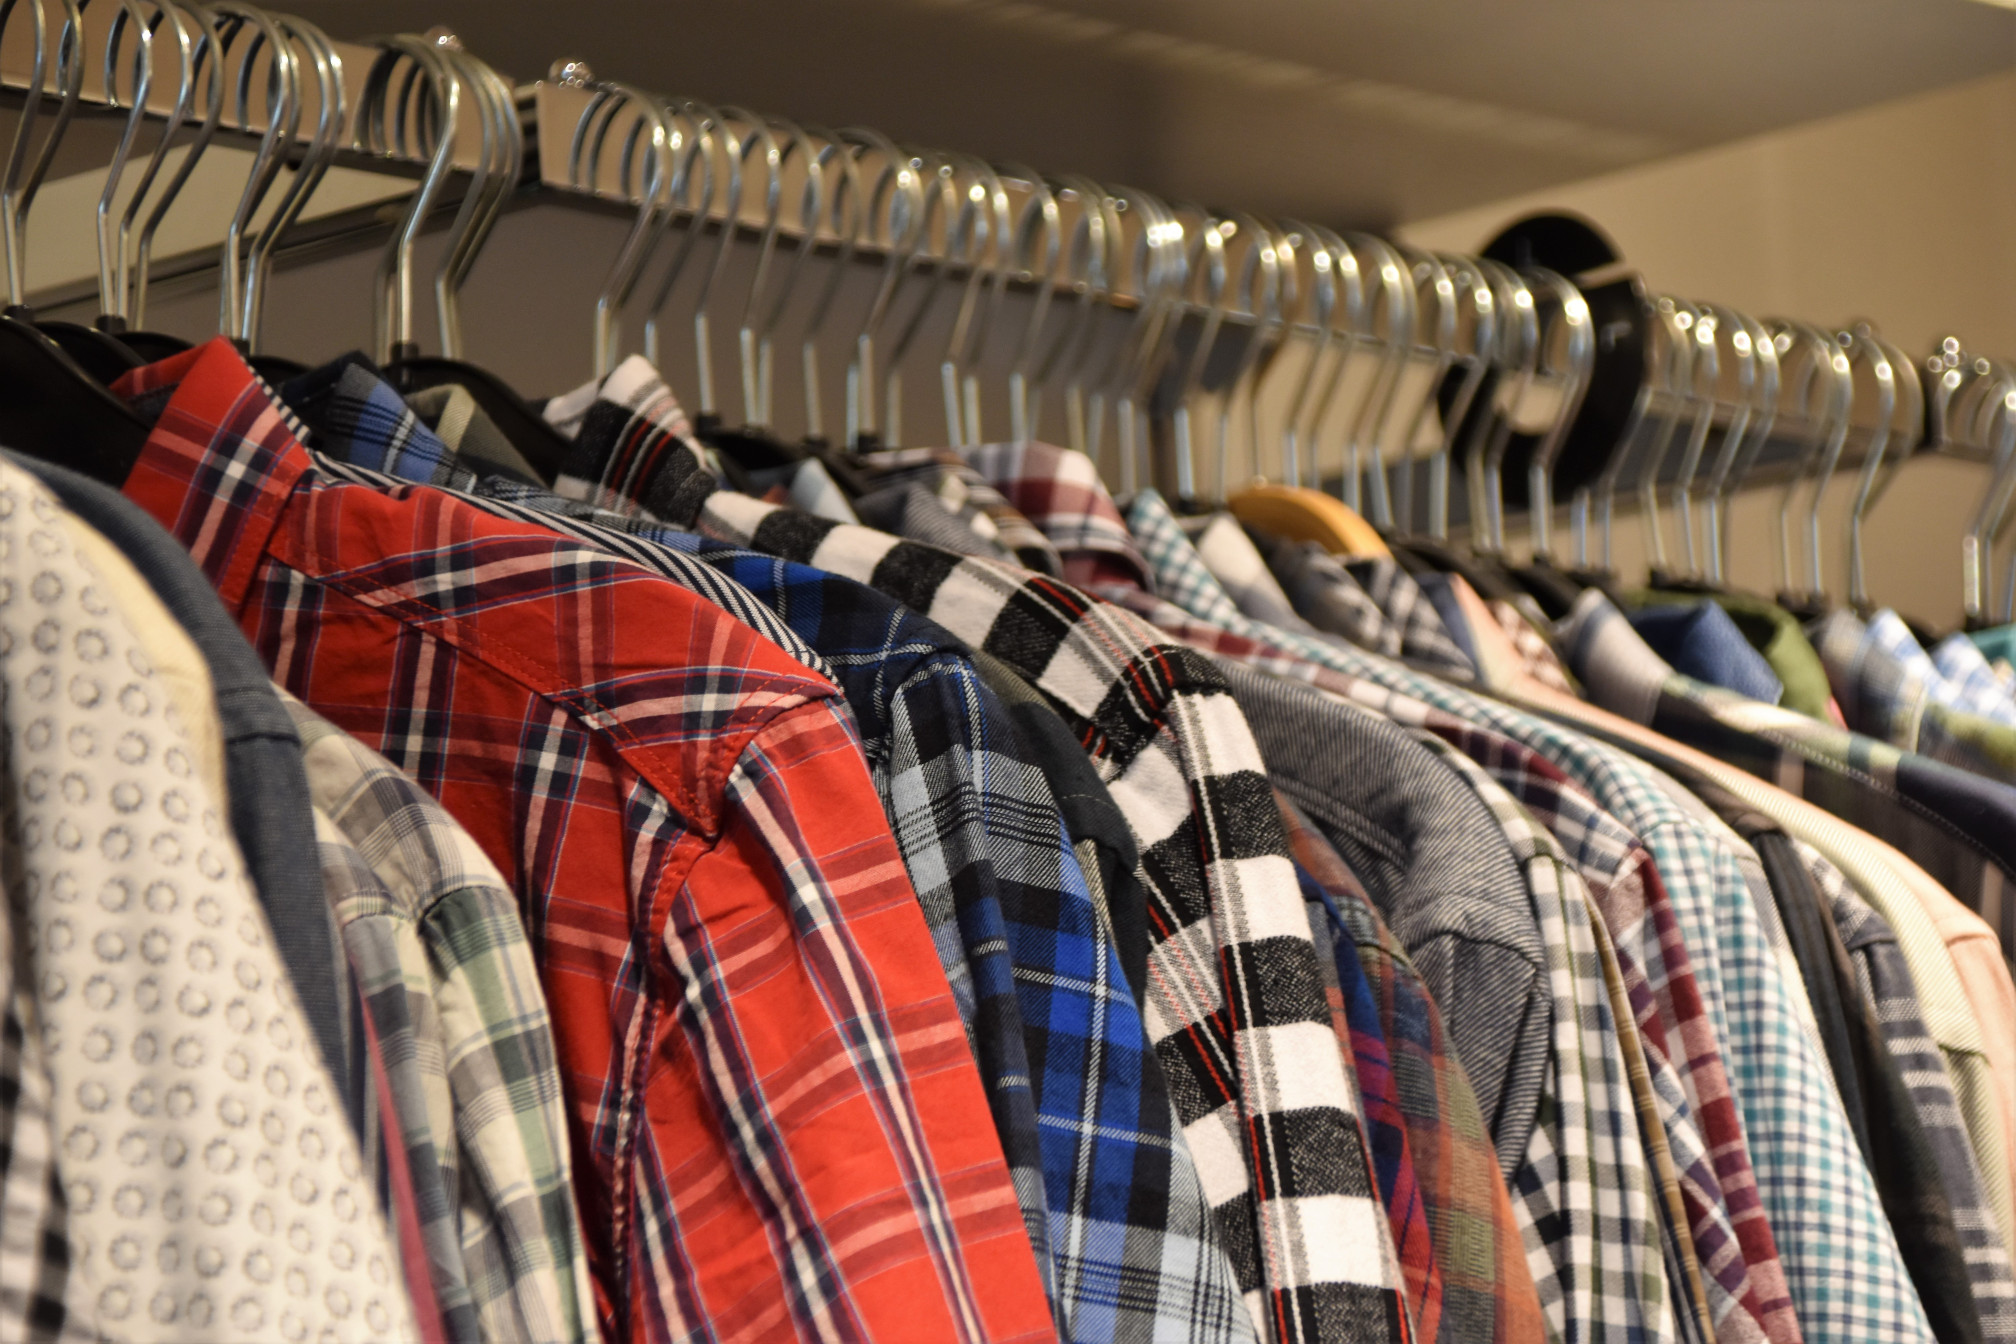 Wide variety of options in men clothing